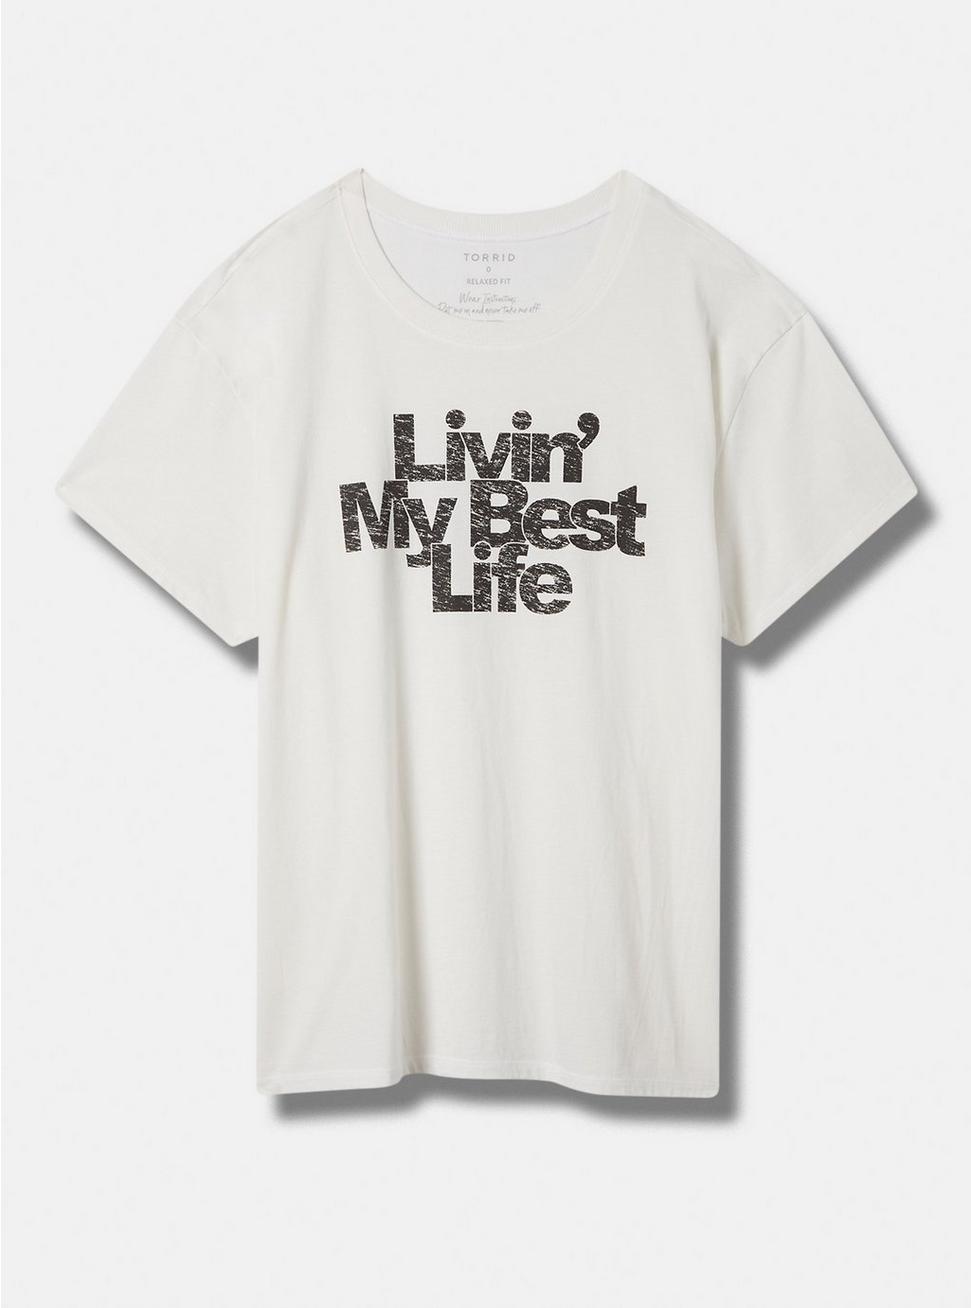 Livin Life Relaxed Fit Vintage Cotton Jersey Crew Neck Tee, IVORY, hi-res